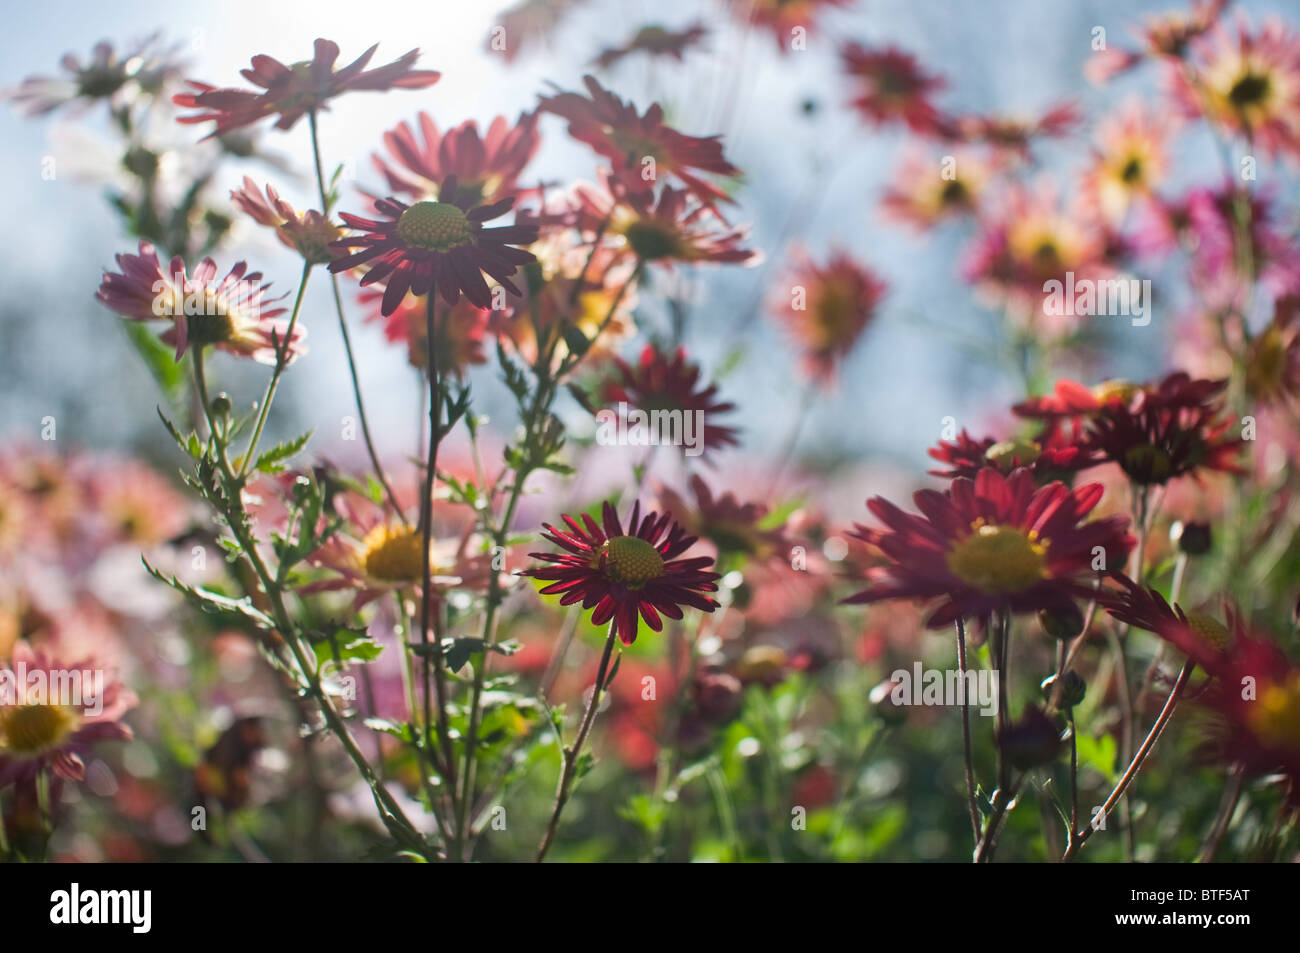 Mums are a popular fall flower in the United States and provide color in gardens well into Autumn. Stock Photo